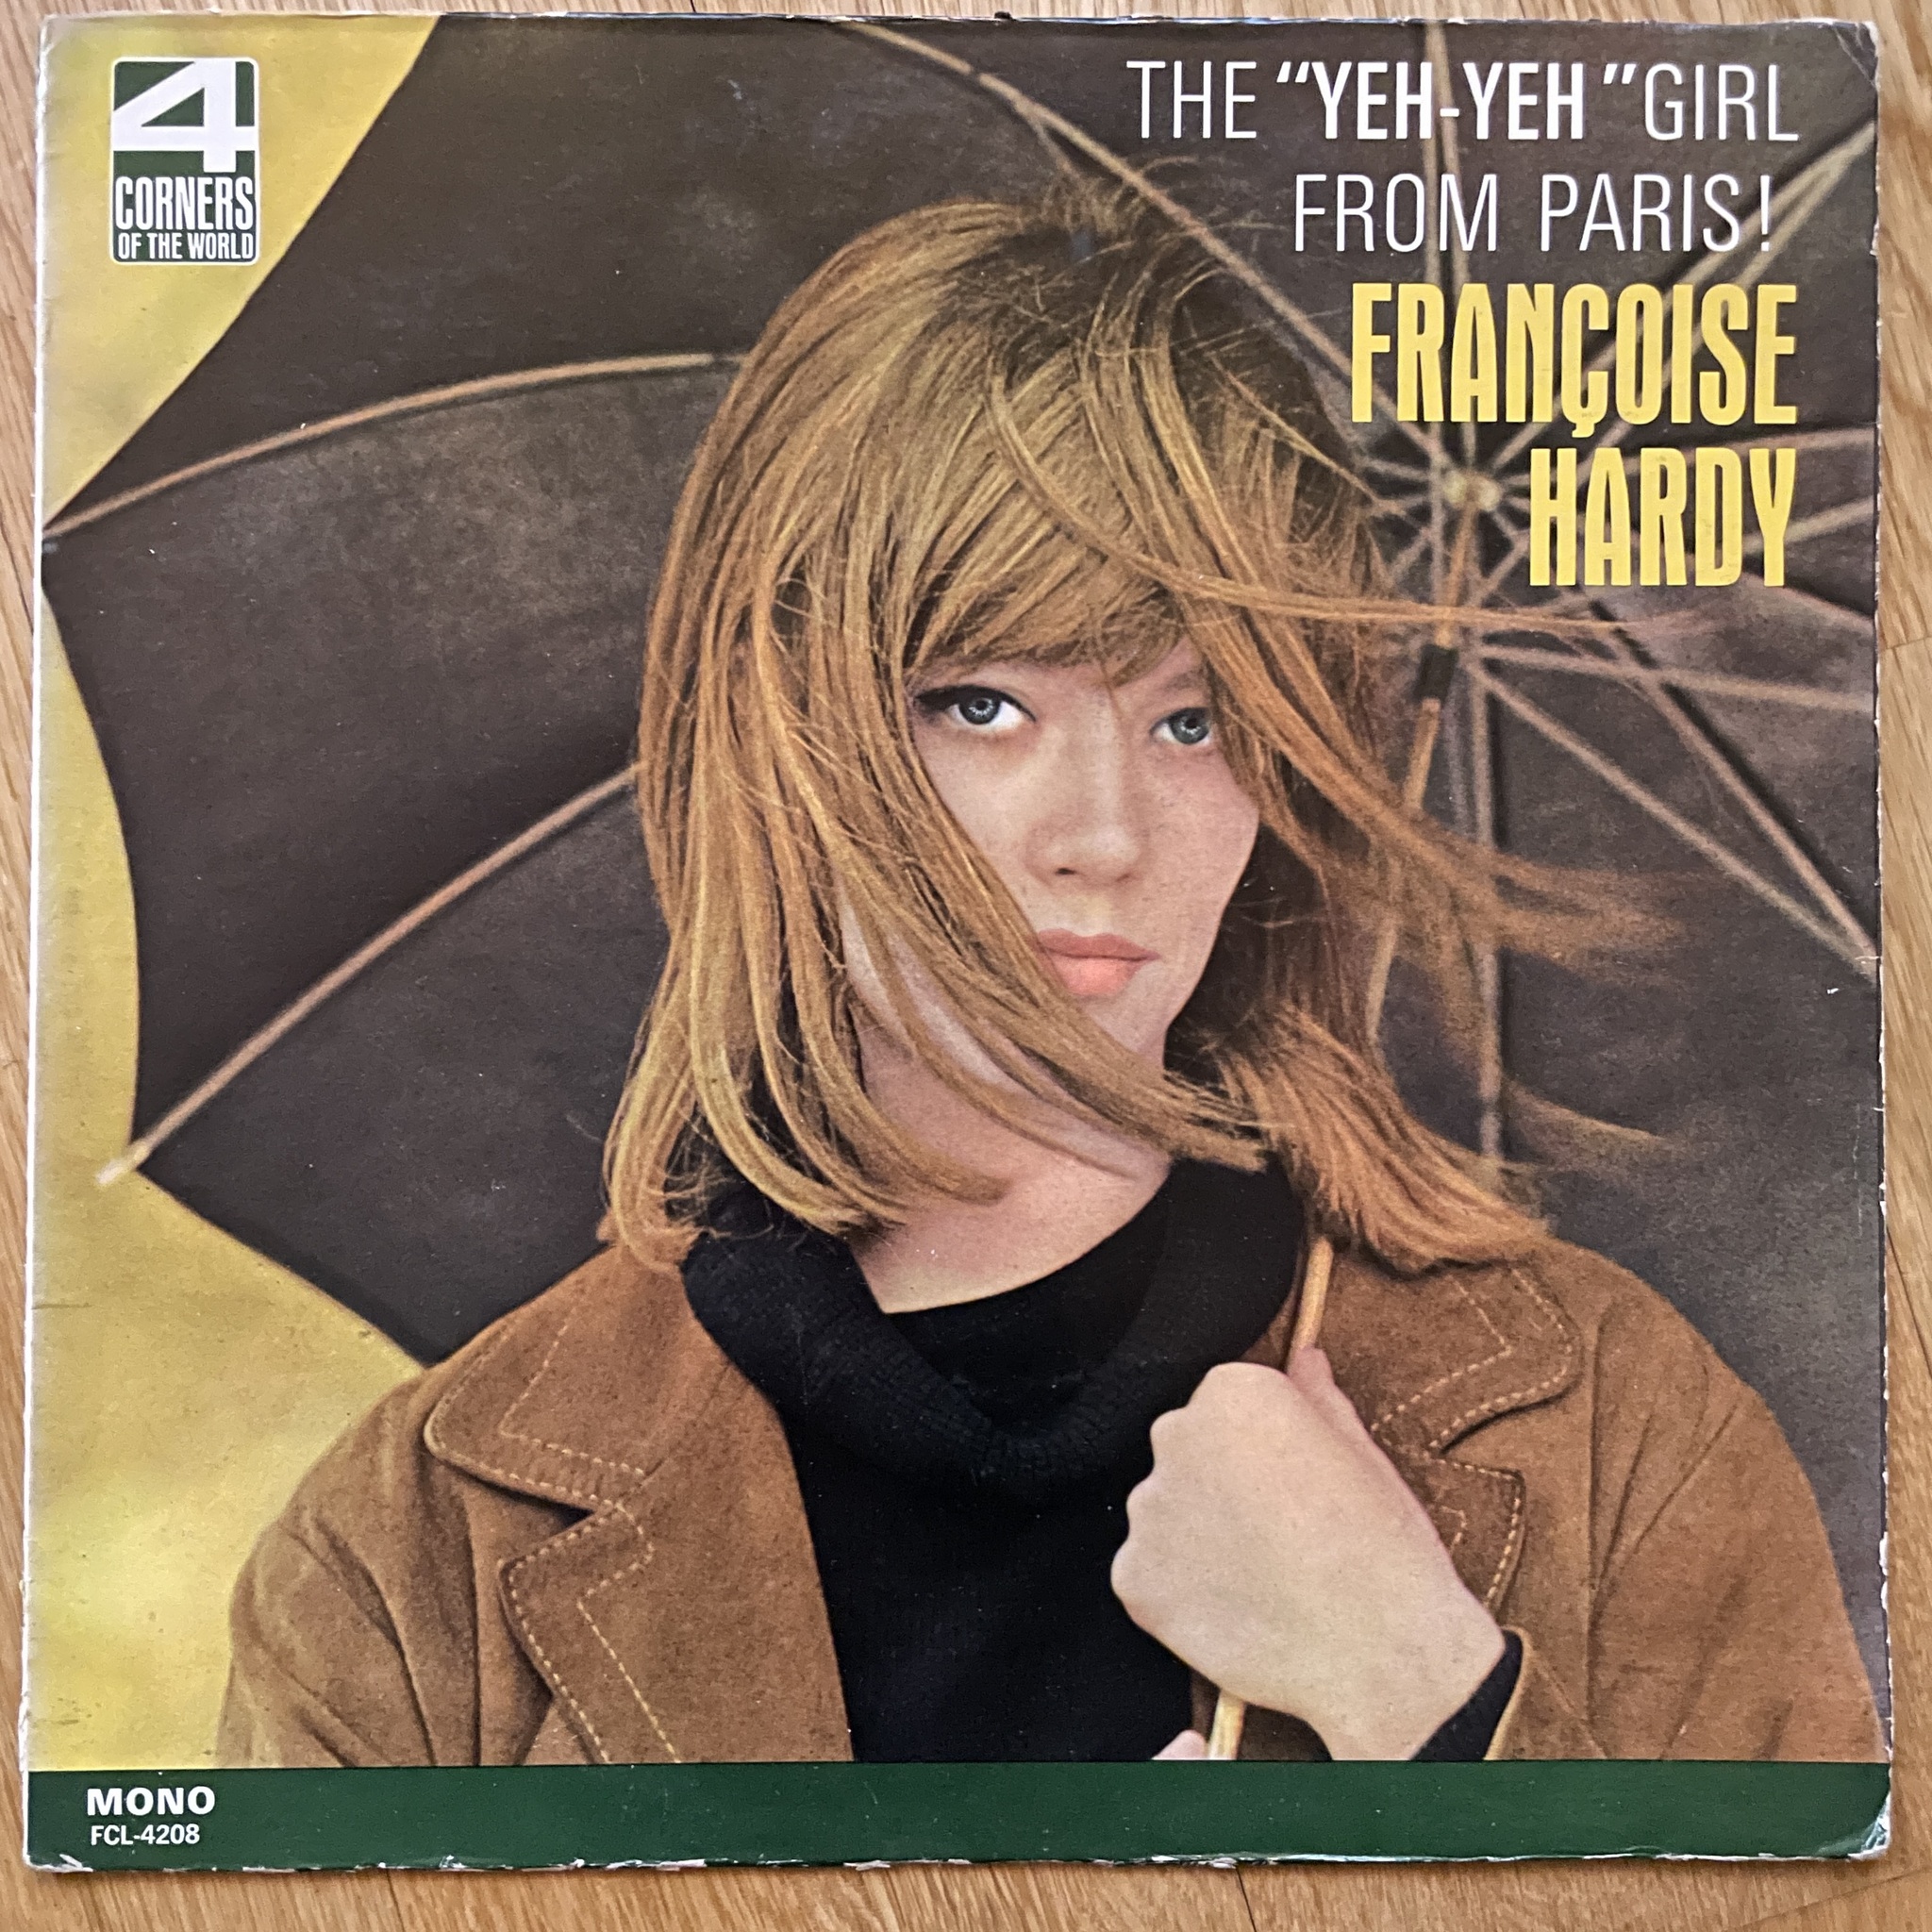 FRANÇOISE HARDY The "Yeh-Yeh" Girl From Paris! (4 Corners Of The World - USA original) (VG-) LP